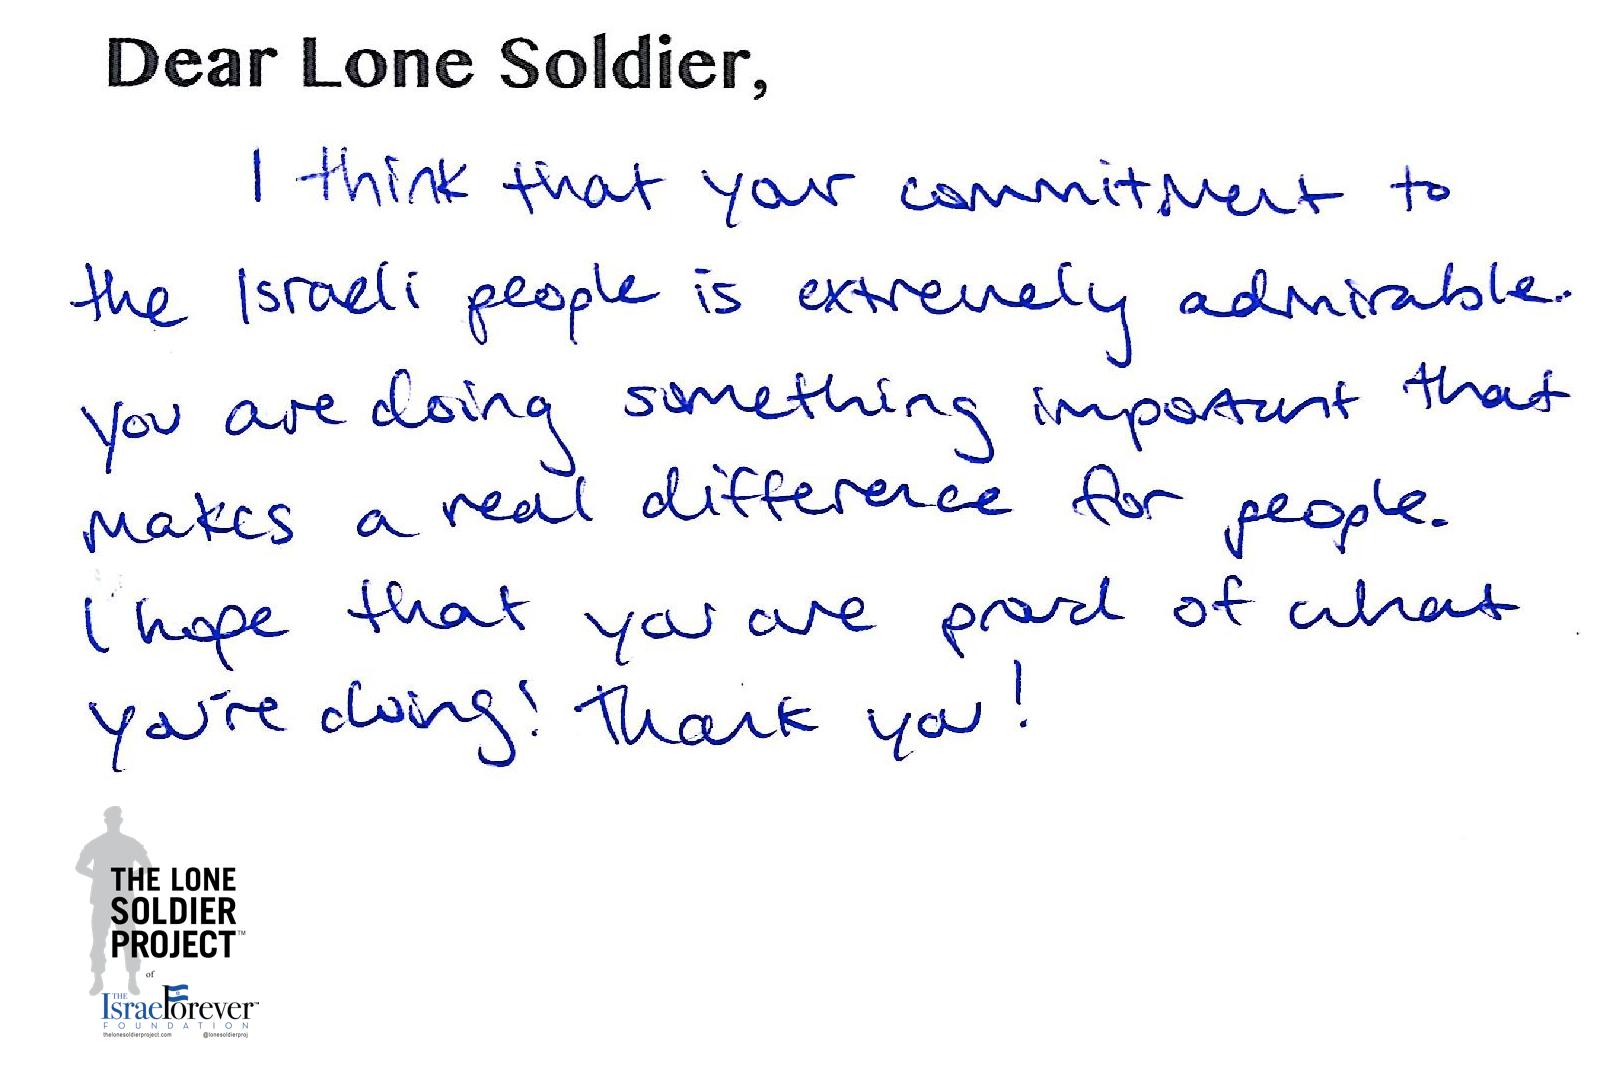 Campers at JCC of Greater Washington Send Thank You Letters to IDF Lone Soldiers